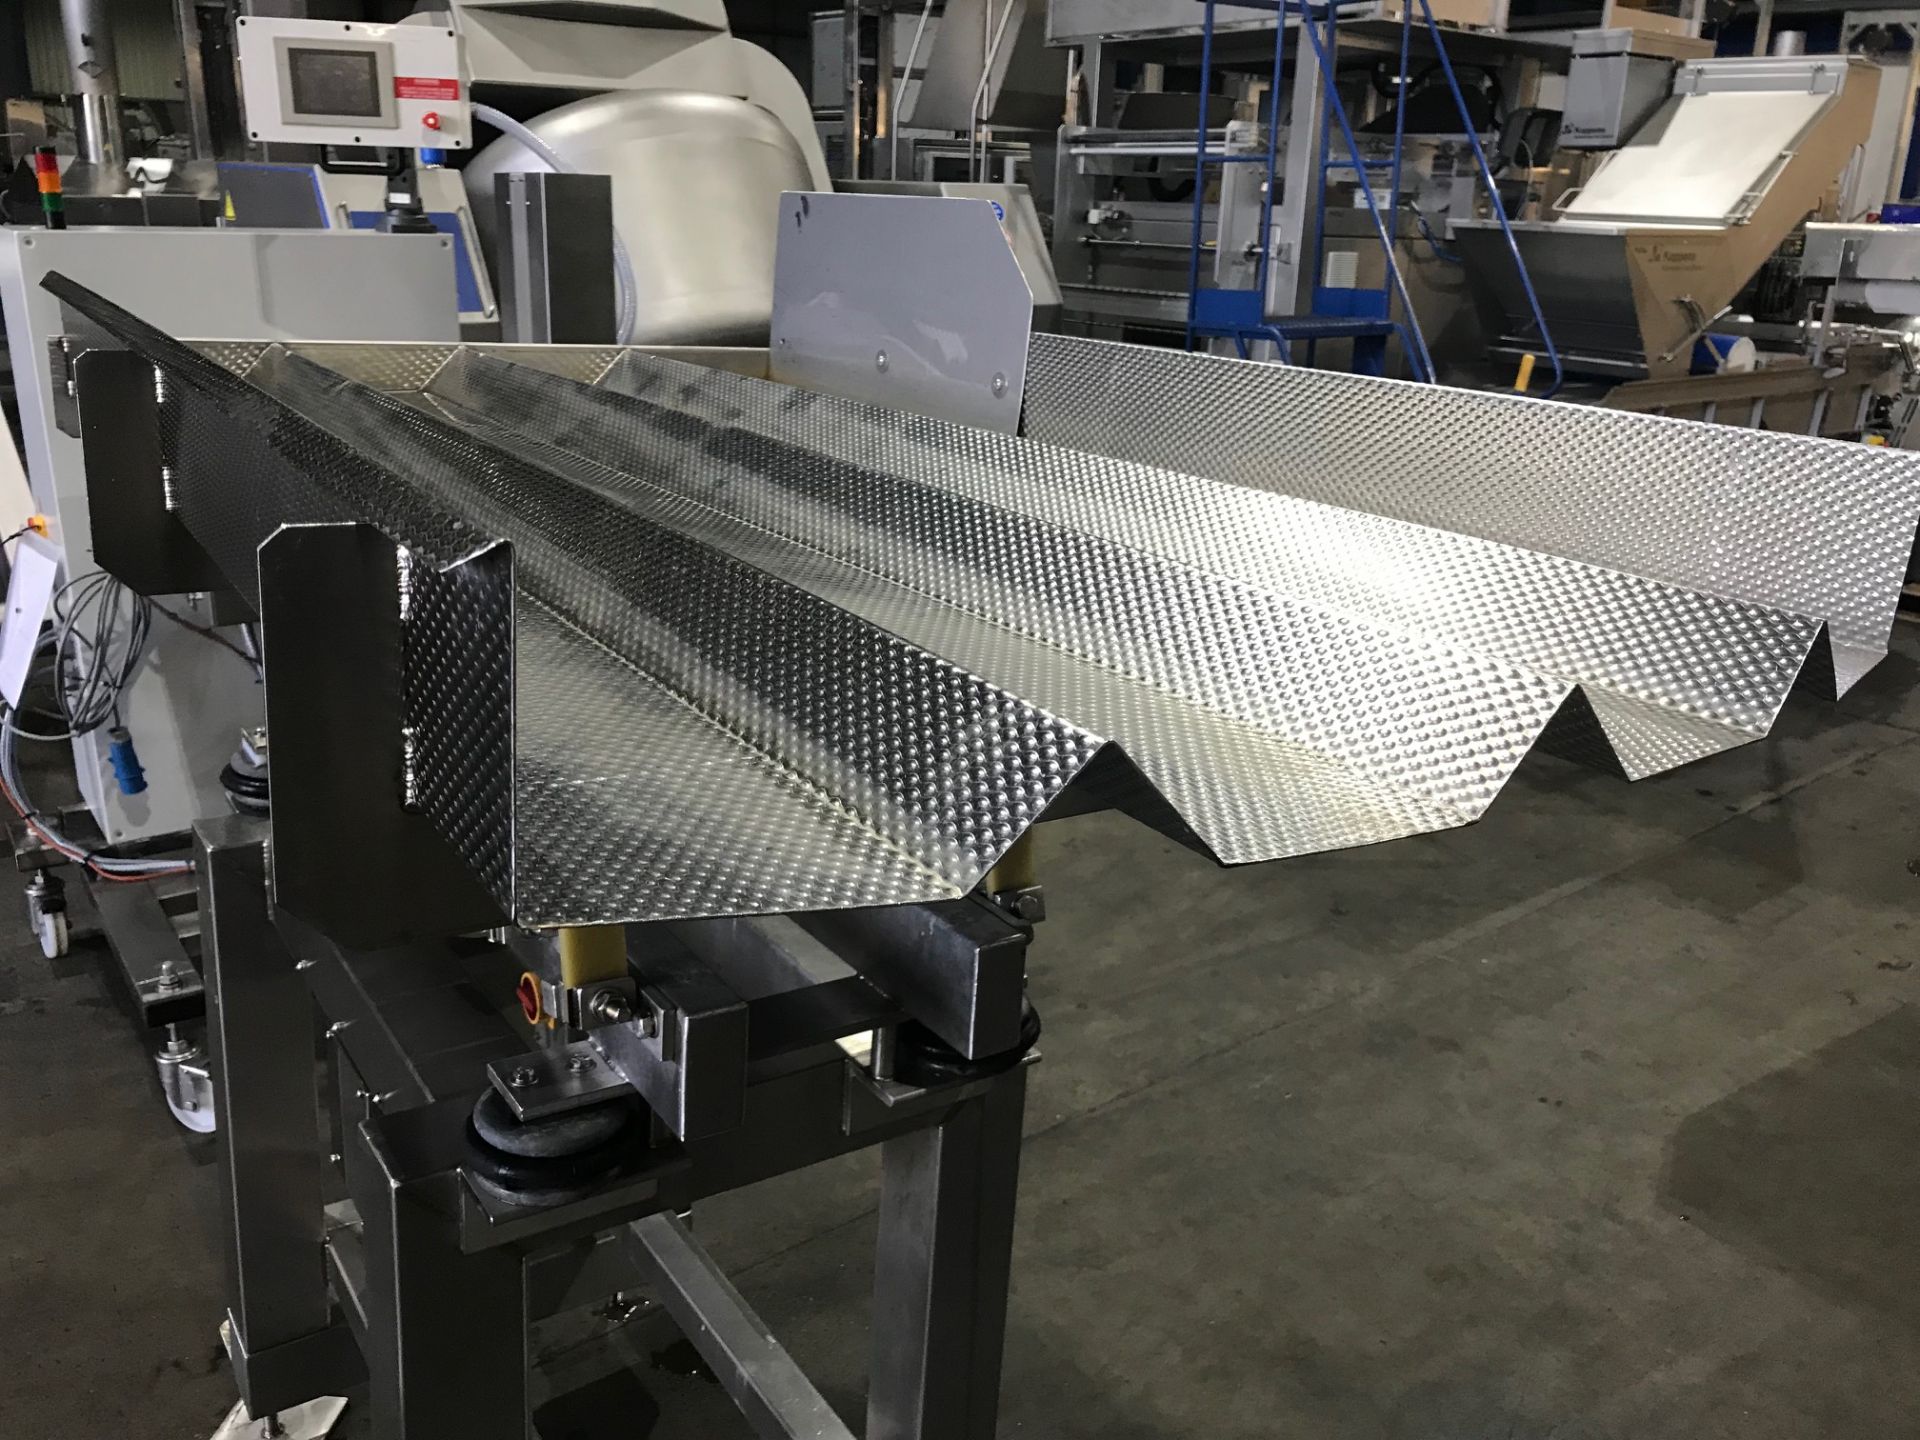 Stainless Steel Frame Mounted Vibratory Feeder - Image 5 of 5